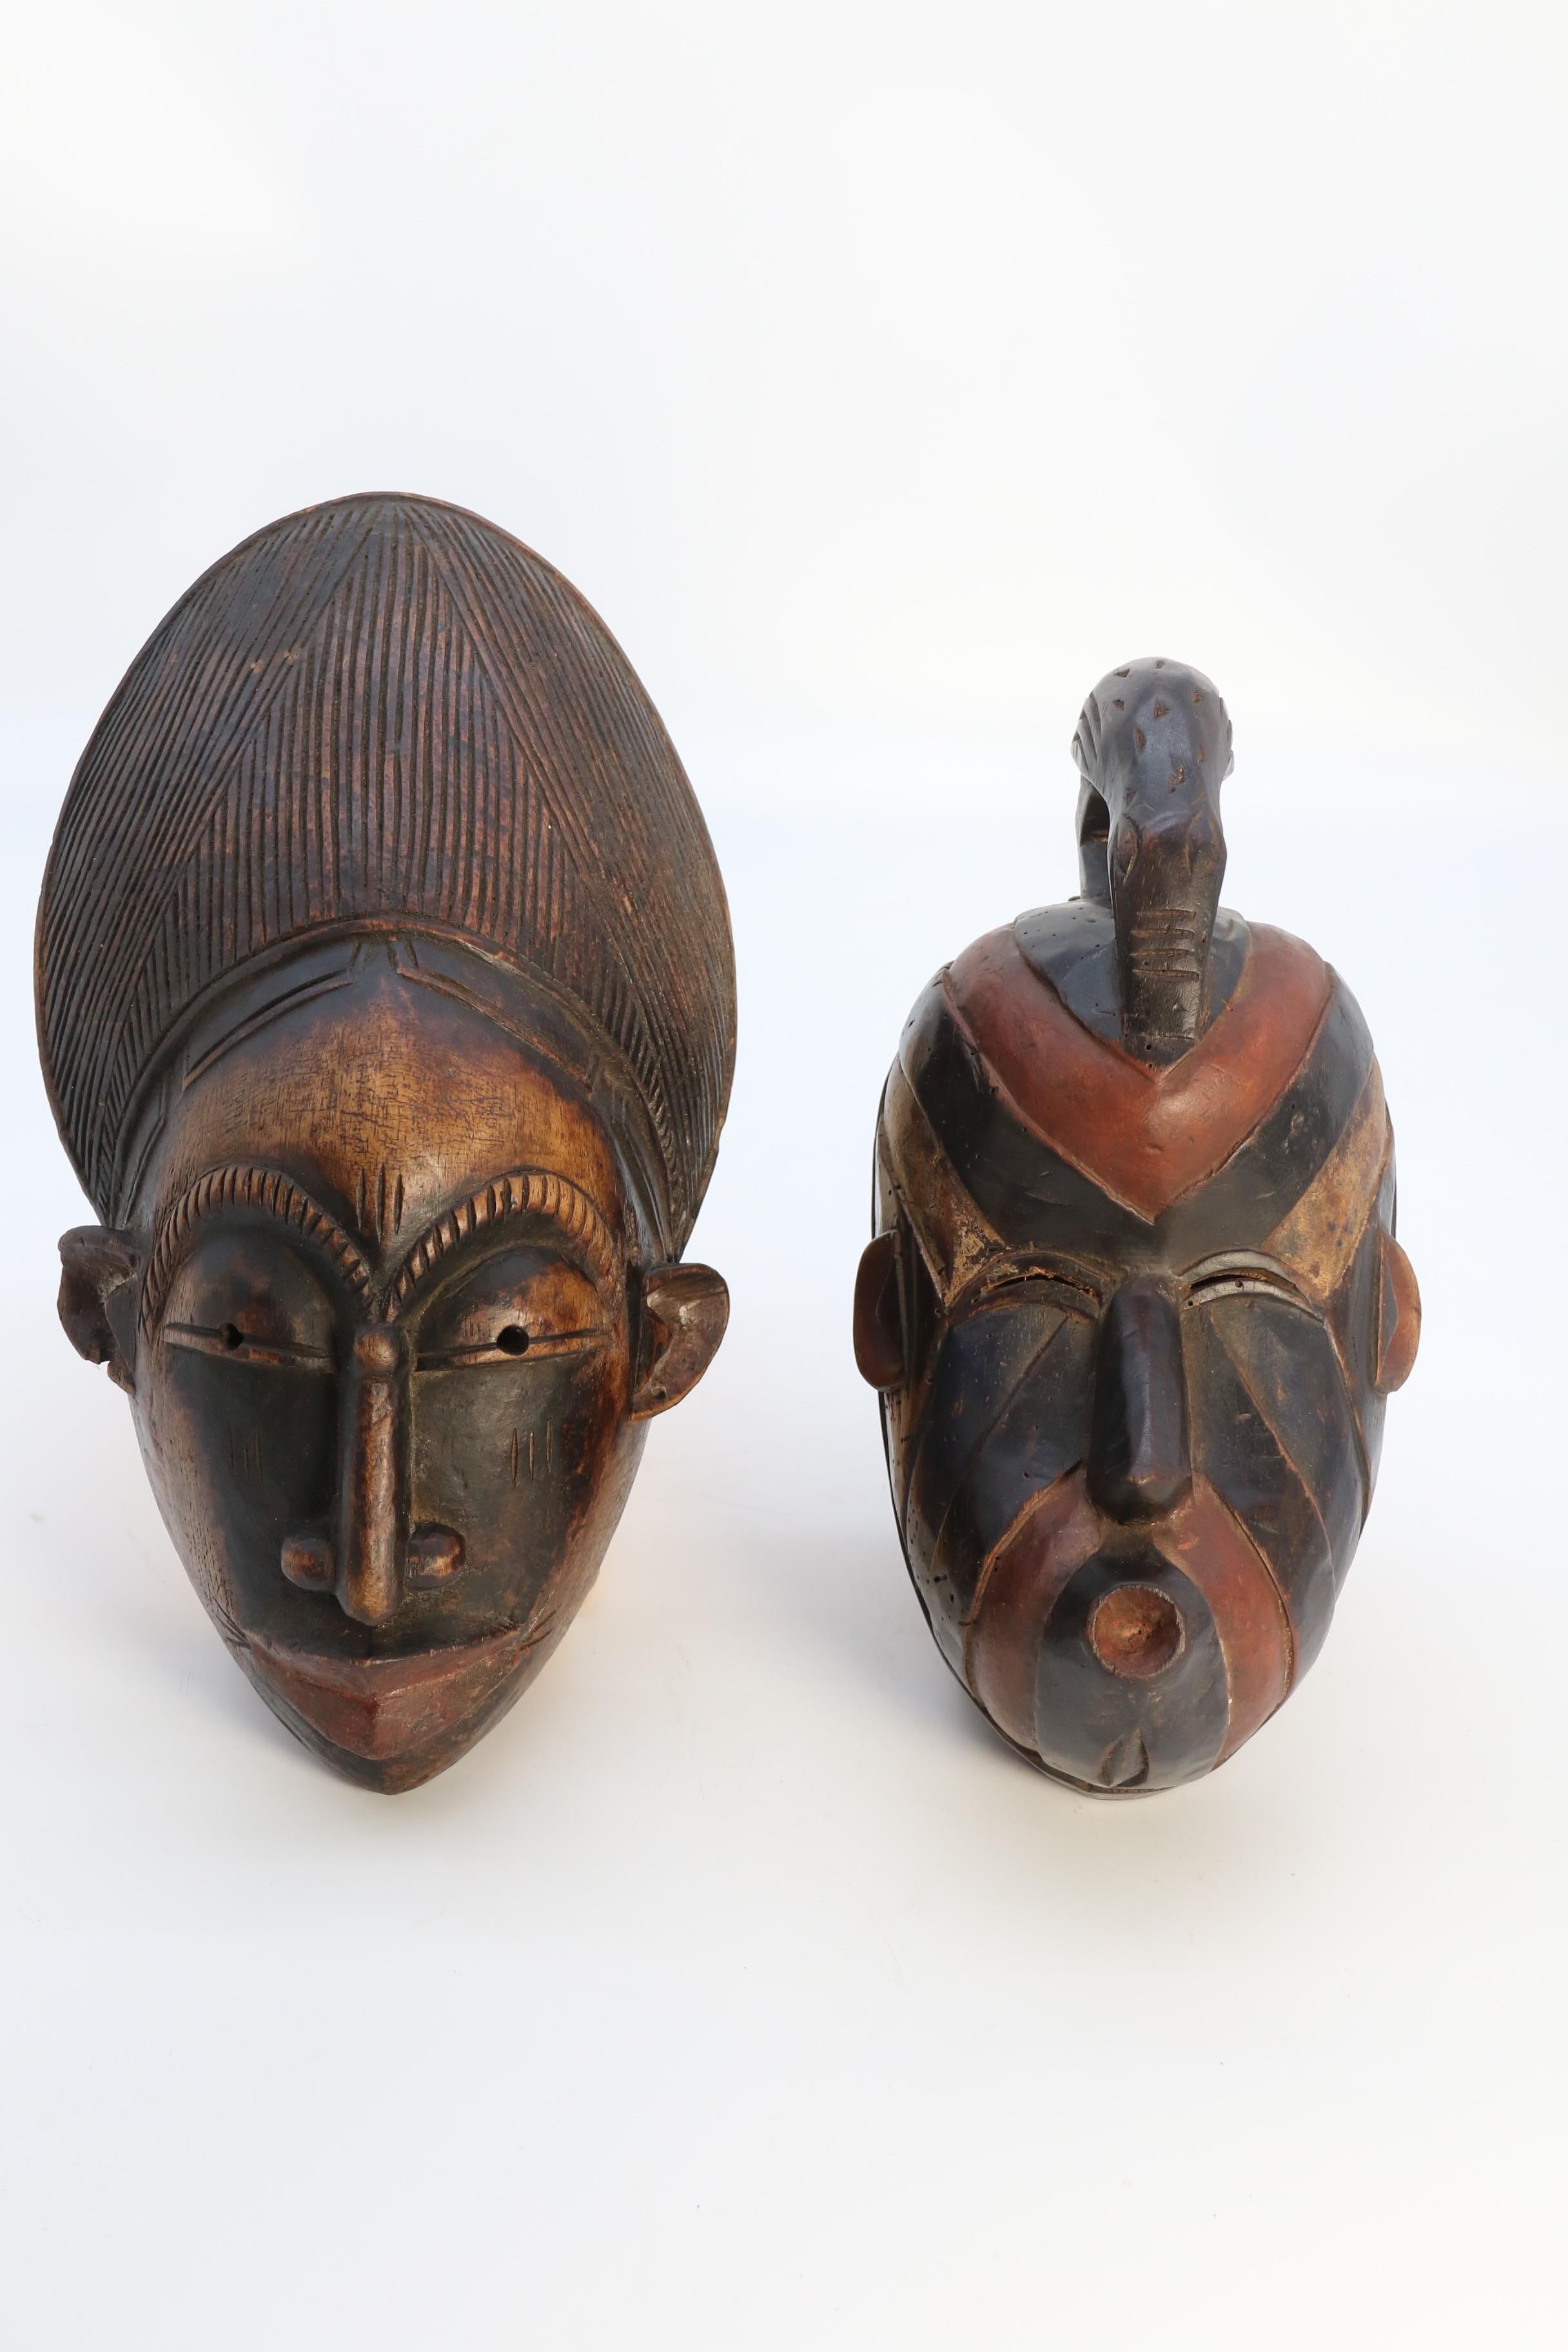 A most interesting and decorative matched pair of African tribal carved wooden face masks which were often used in ceremonial dance. The exaggerated and stylised features were designed to draw the attention of shock together with their primitive